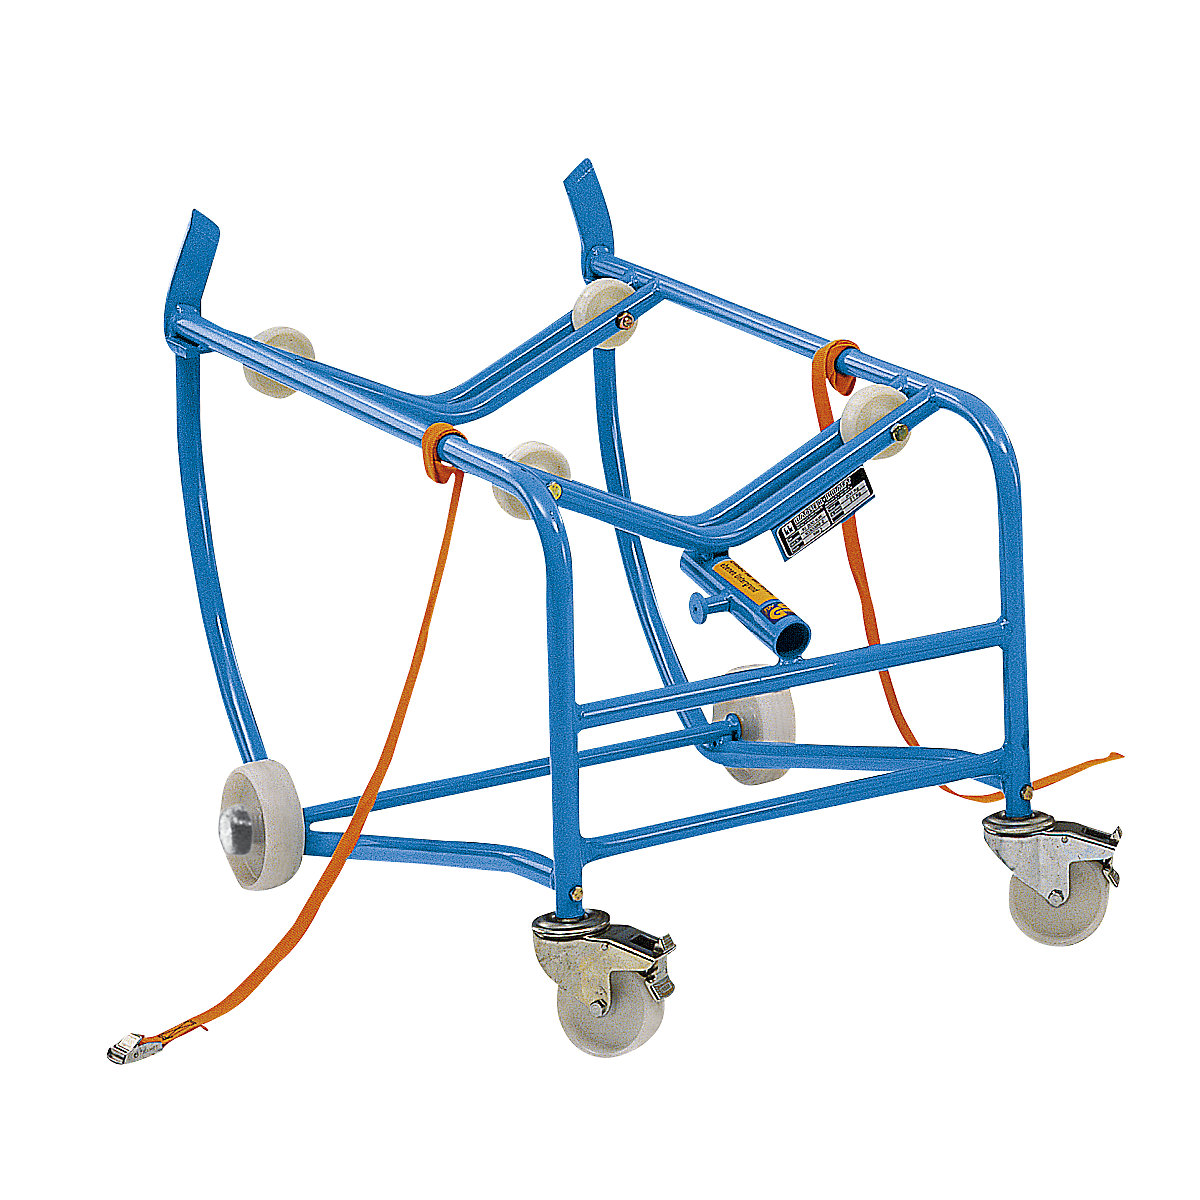 EUROKRAFTpro – Drum stand for 200 litre drum, drum support with 2 metal rollers, without oil drip tray